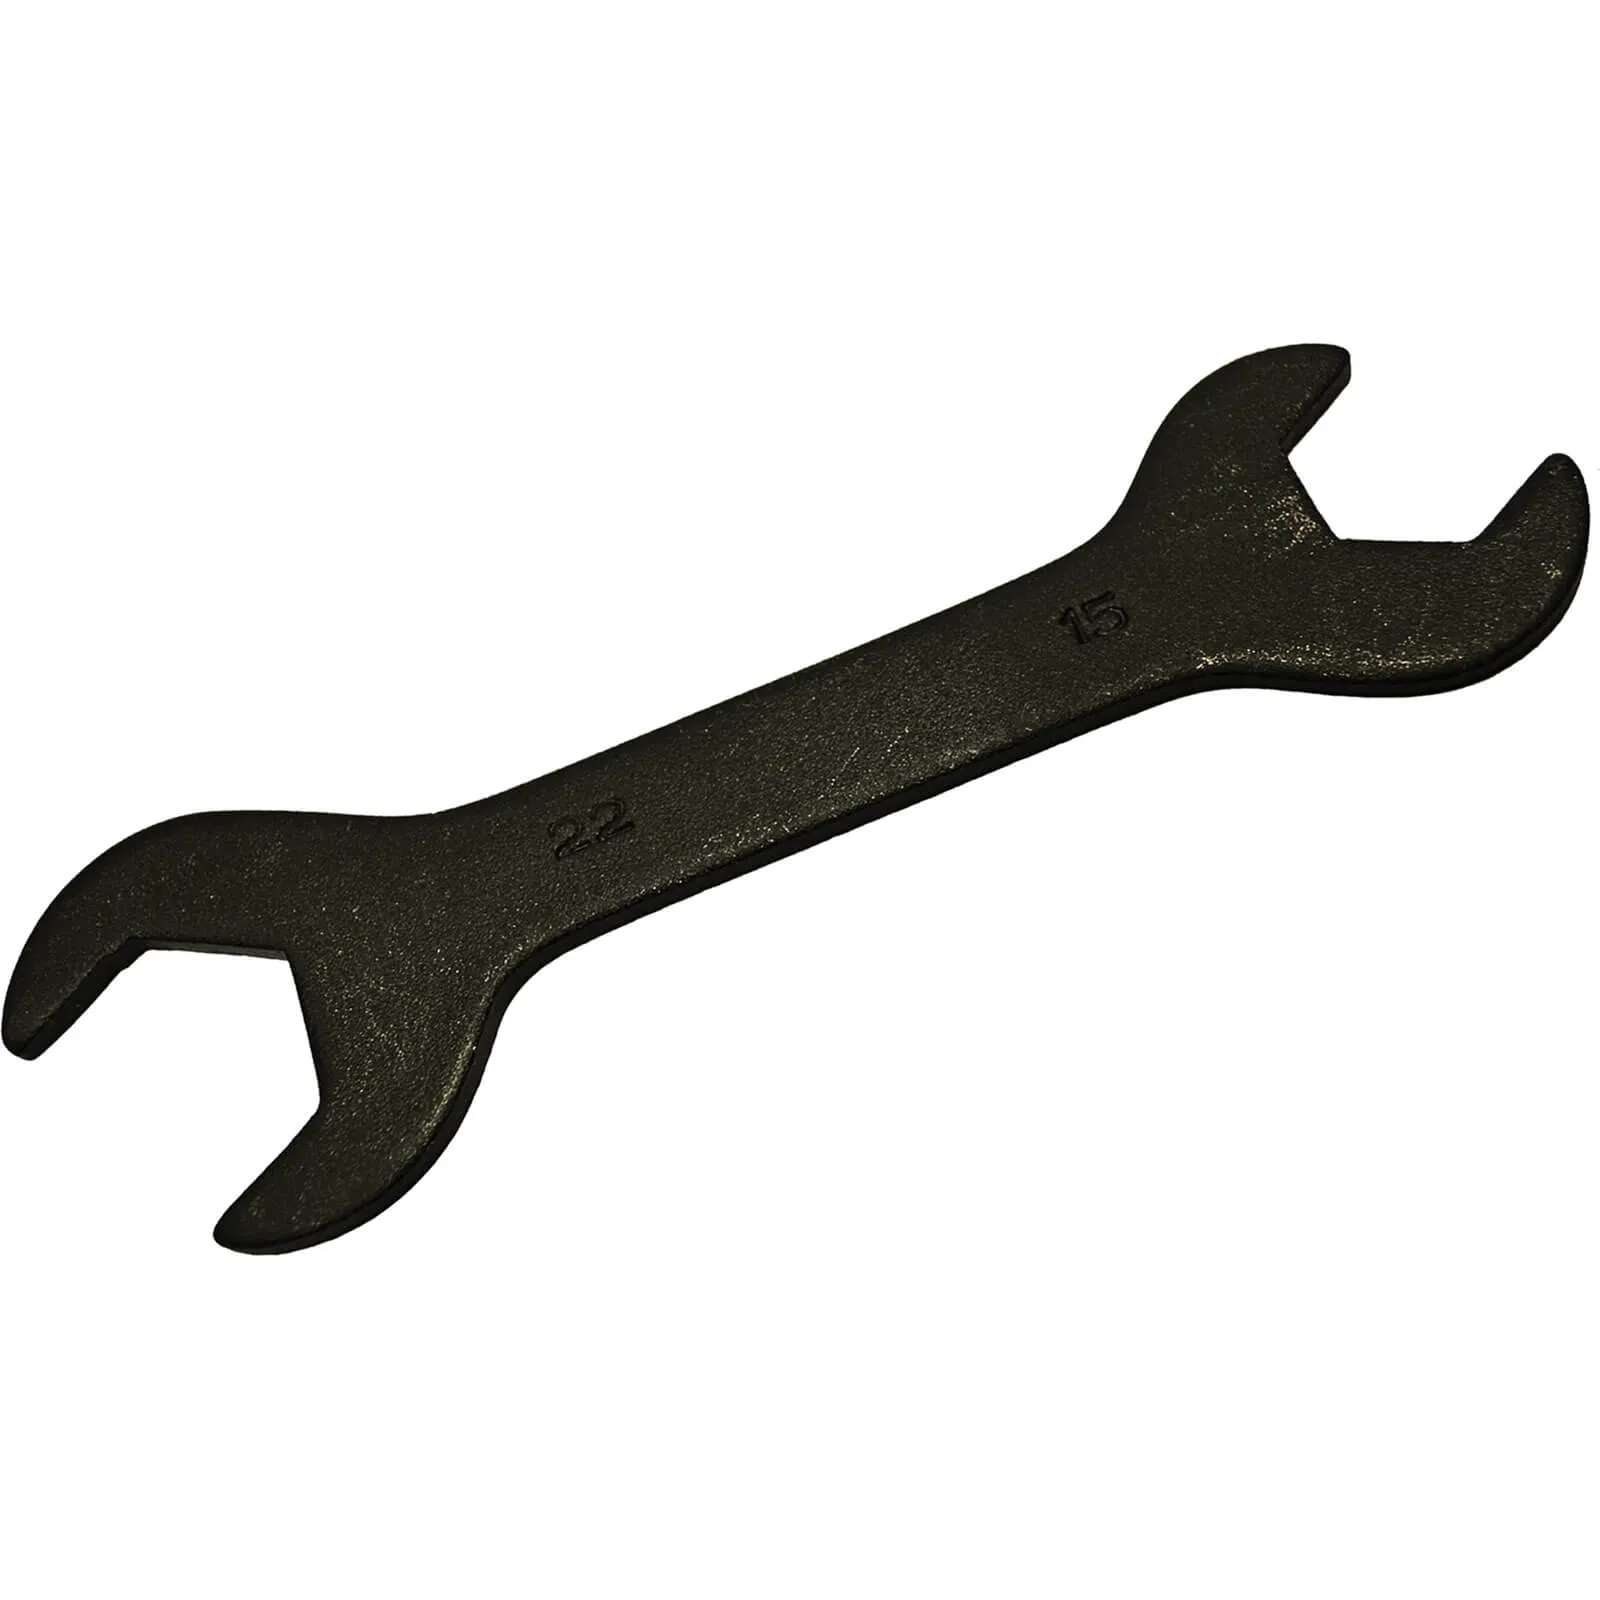 Faithfull Compression Fitting Spanner Metric - 15mm x 22mm